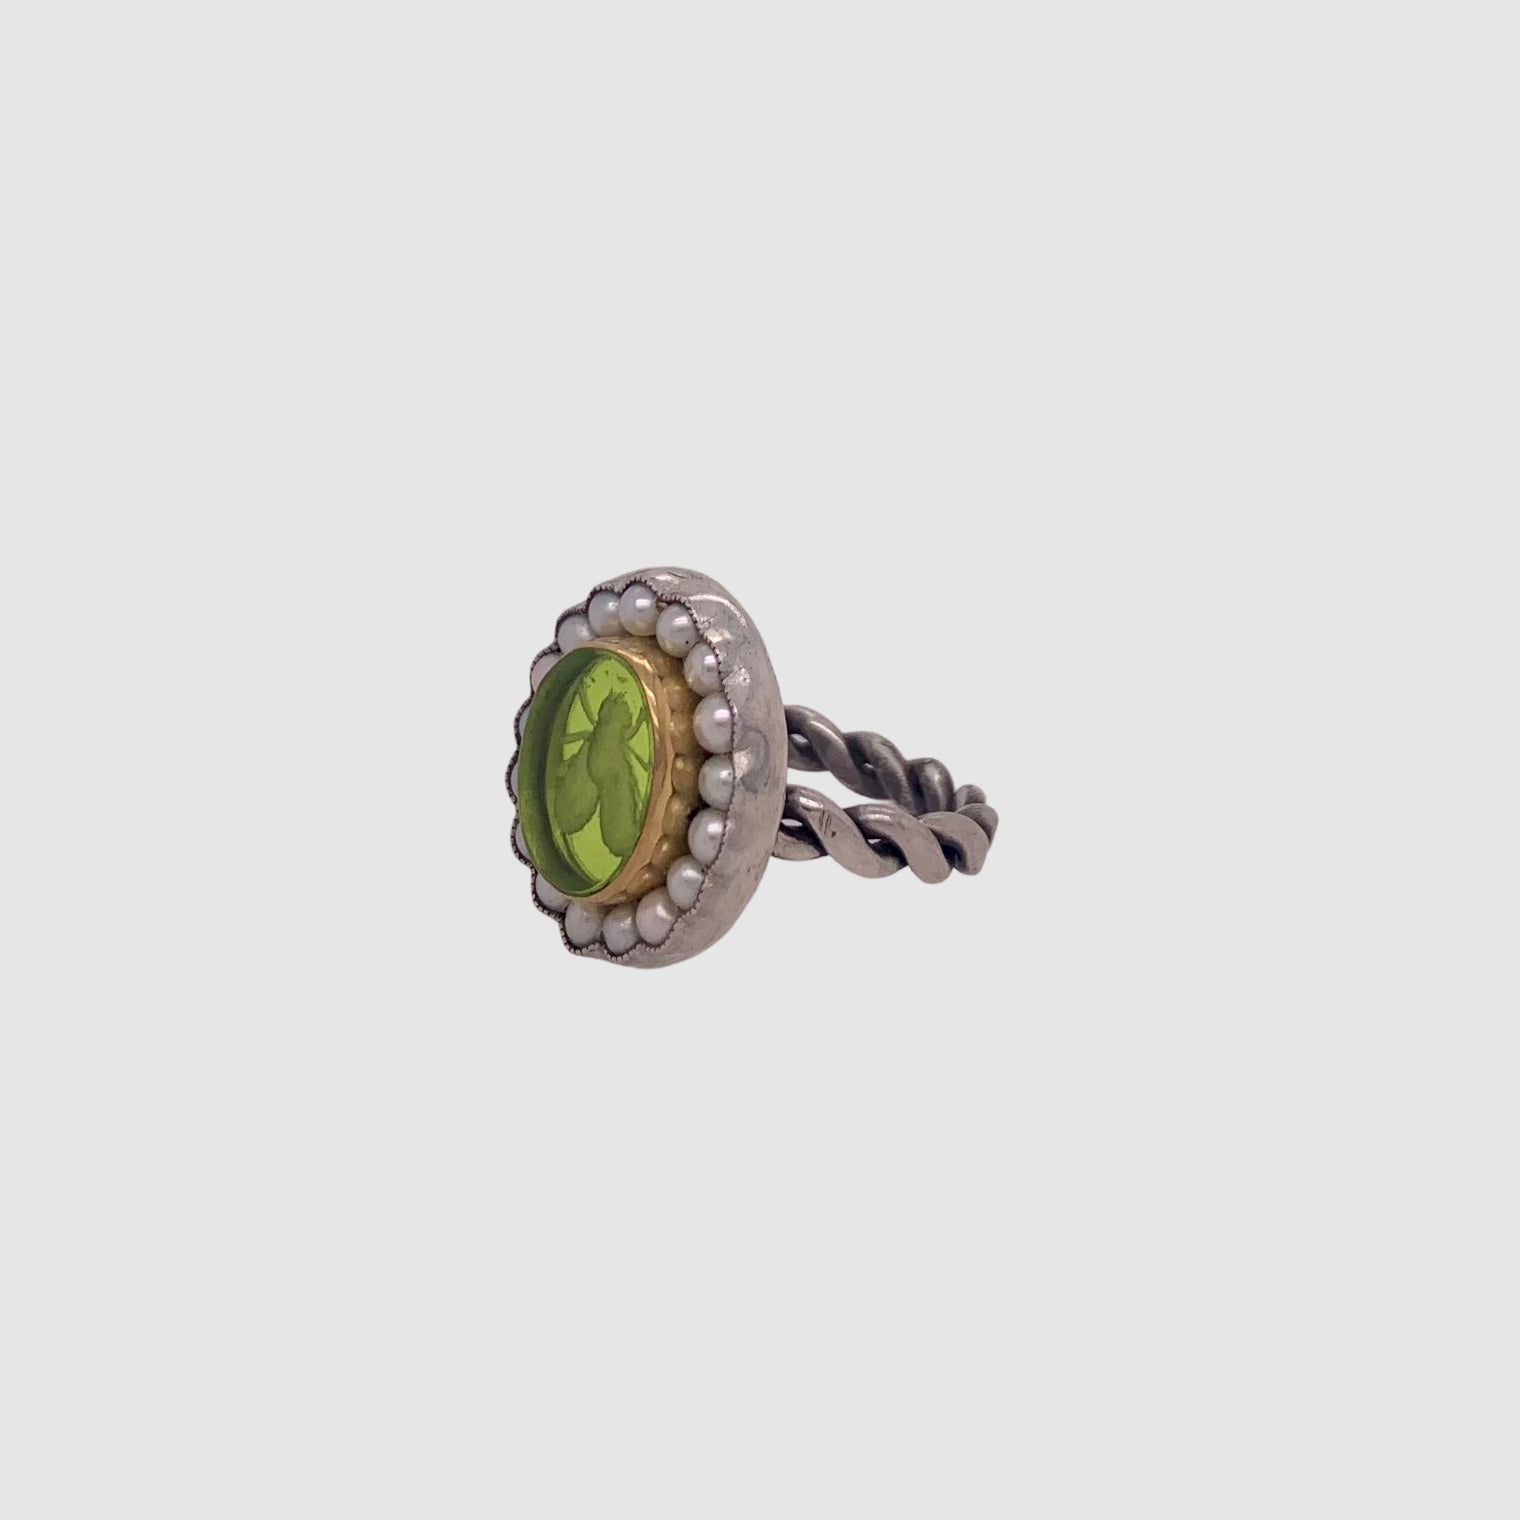 INTAGLIO // RING // PEARLS // LIME GREEN // INTAGLIO  // SACRED BEE